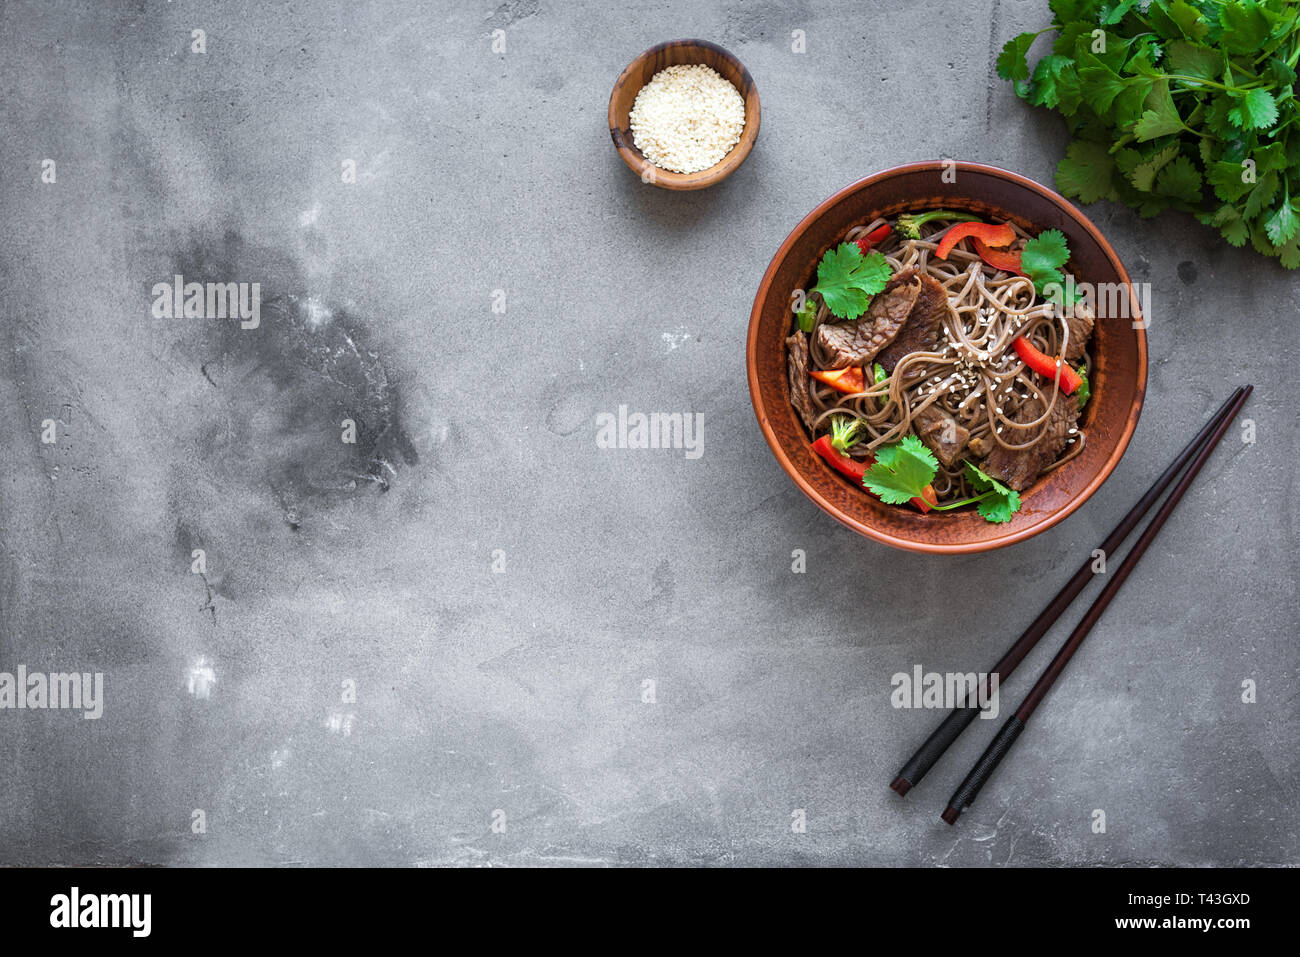 Stir fry with soba noodles, beef and vegetables. Asian healthy food, stir fried meal in bowl on dark background, top view, copy space. Stock Photo